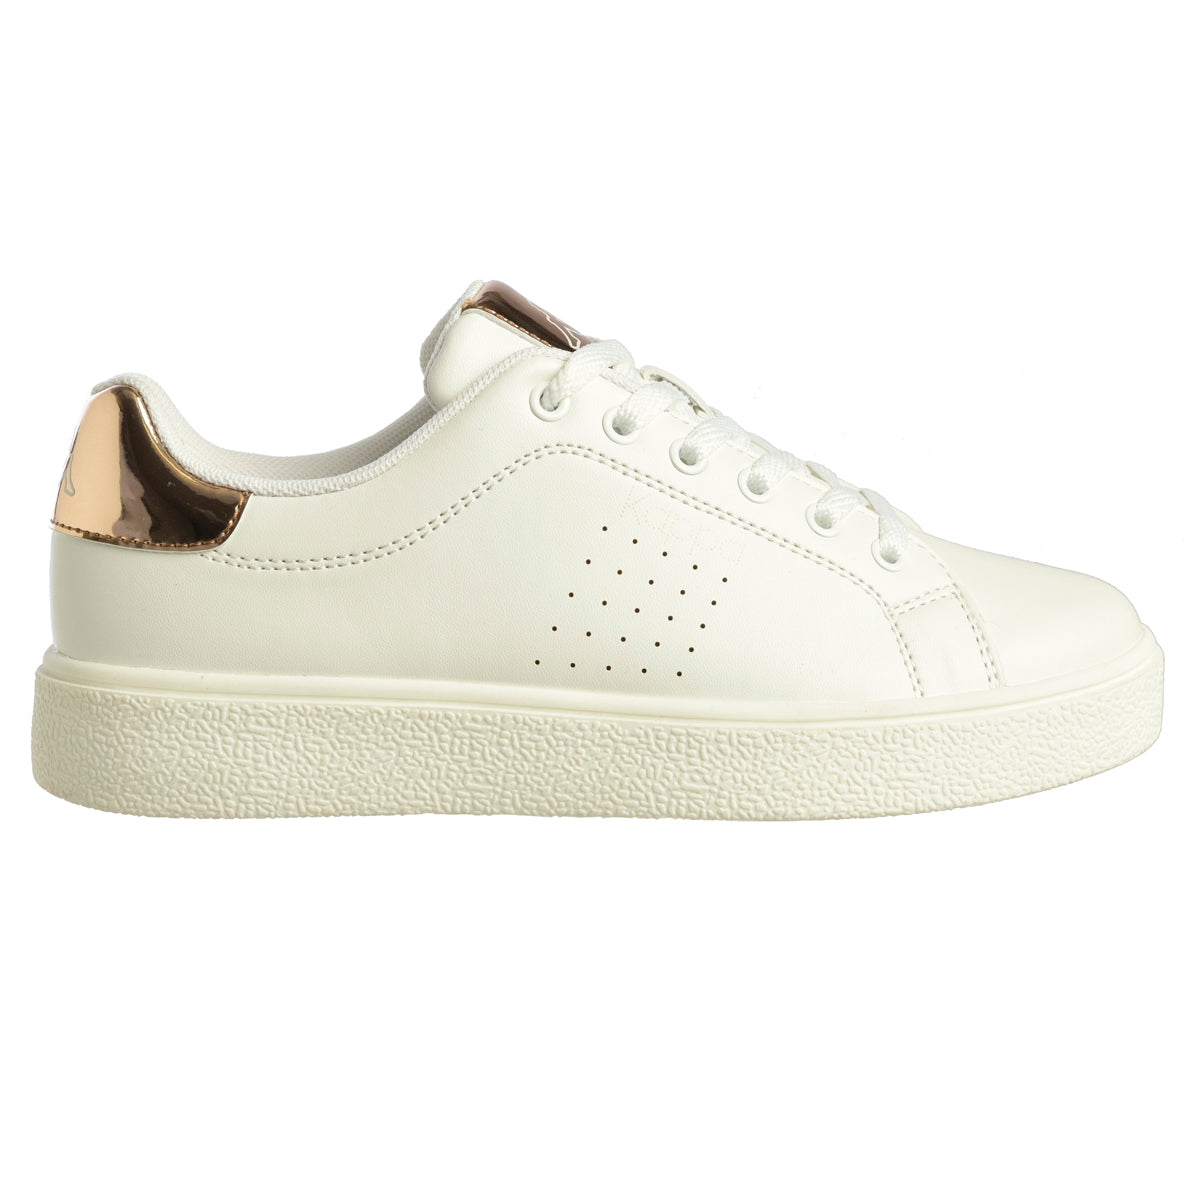 Chaussures lifestyle San Remo Blanc femme - image 1